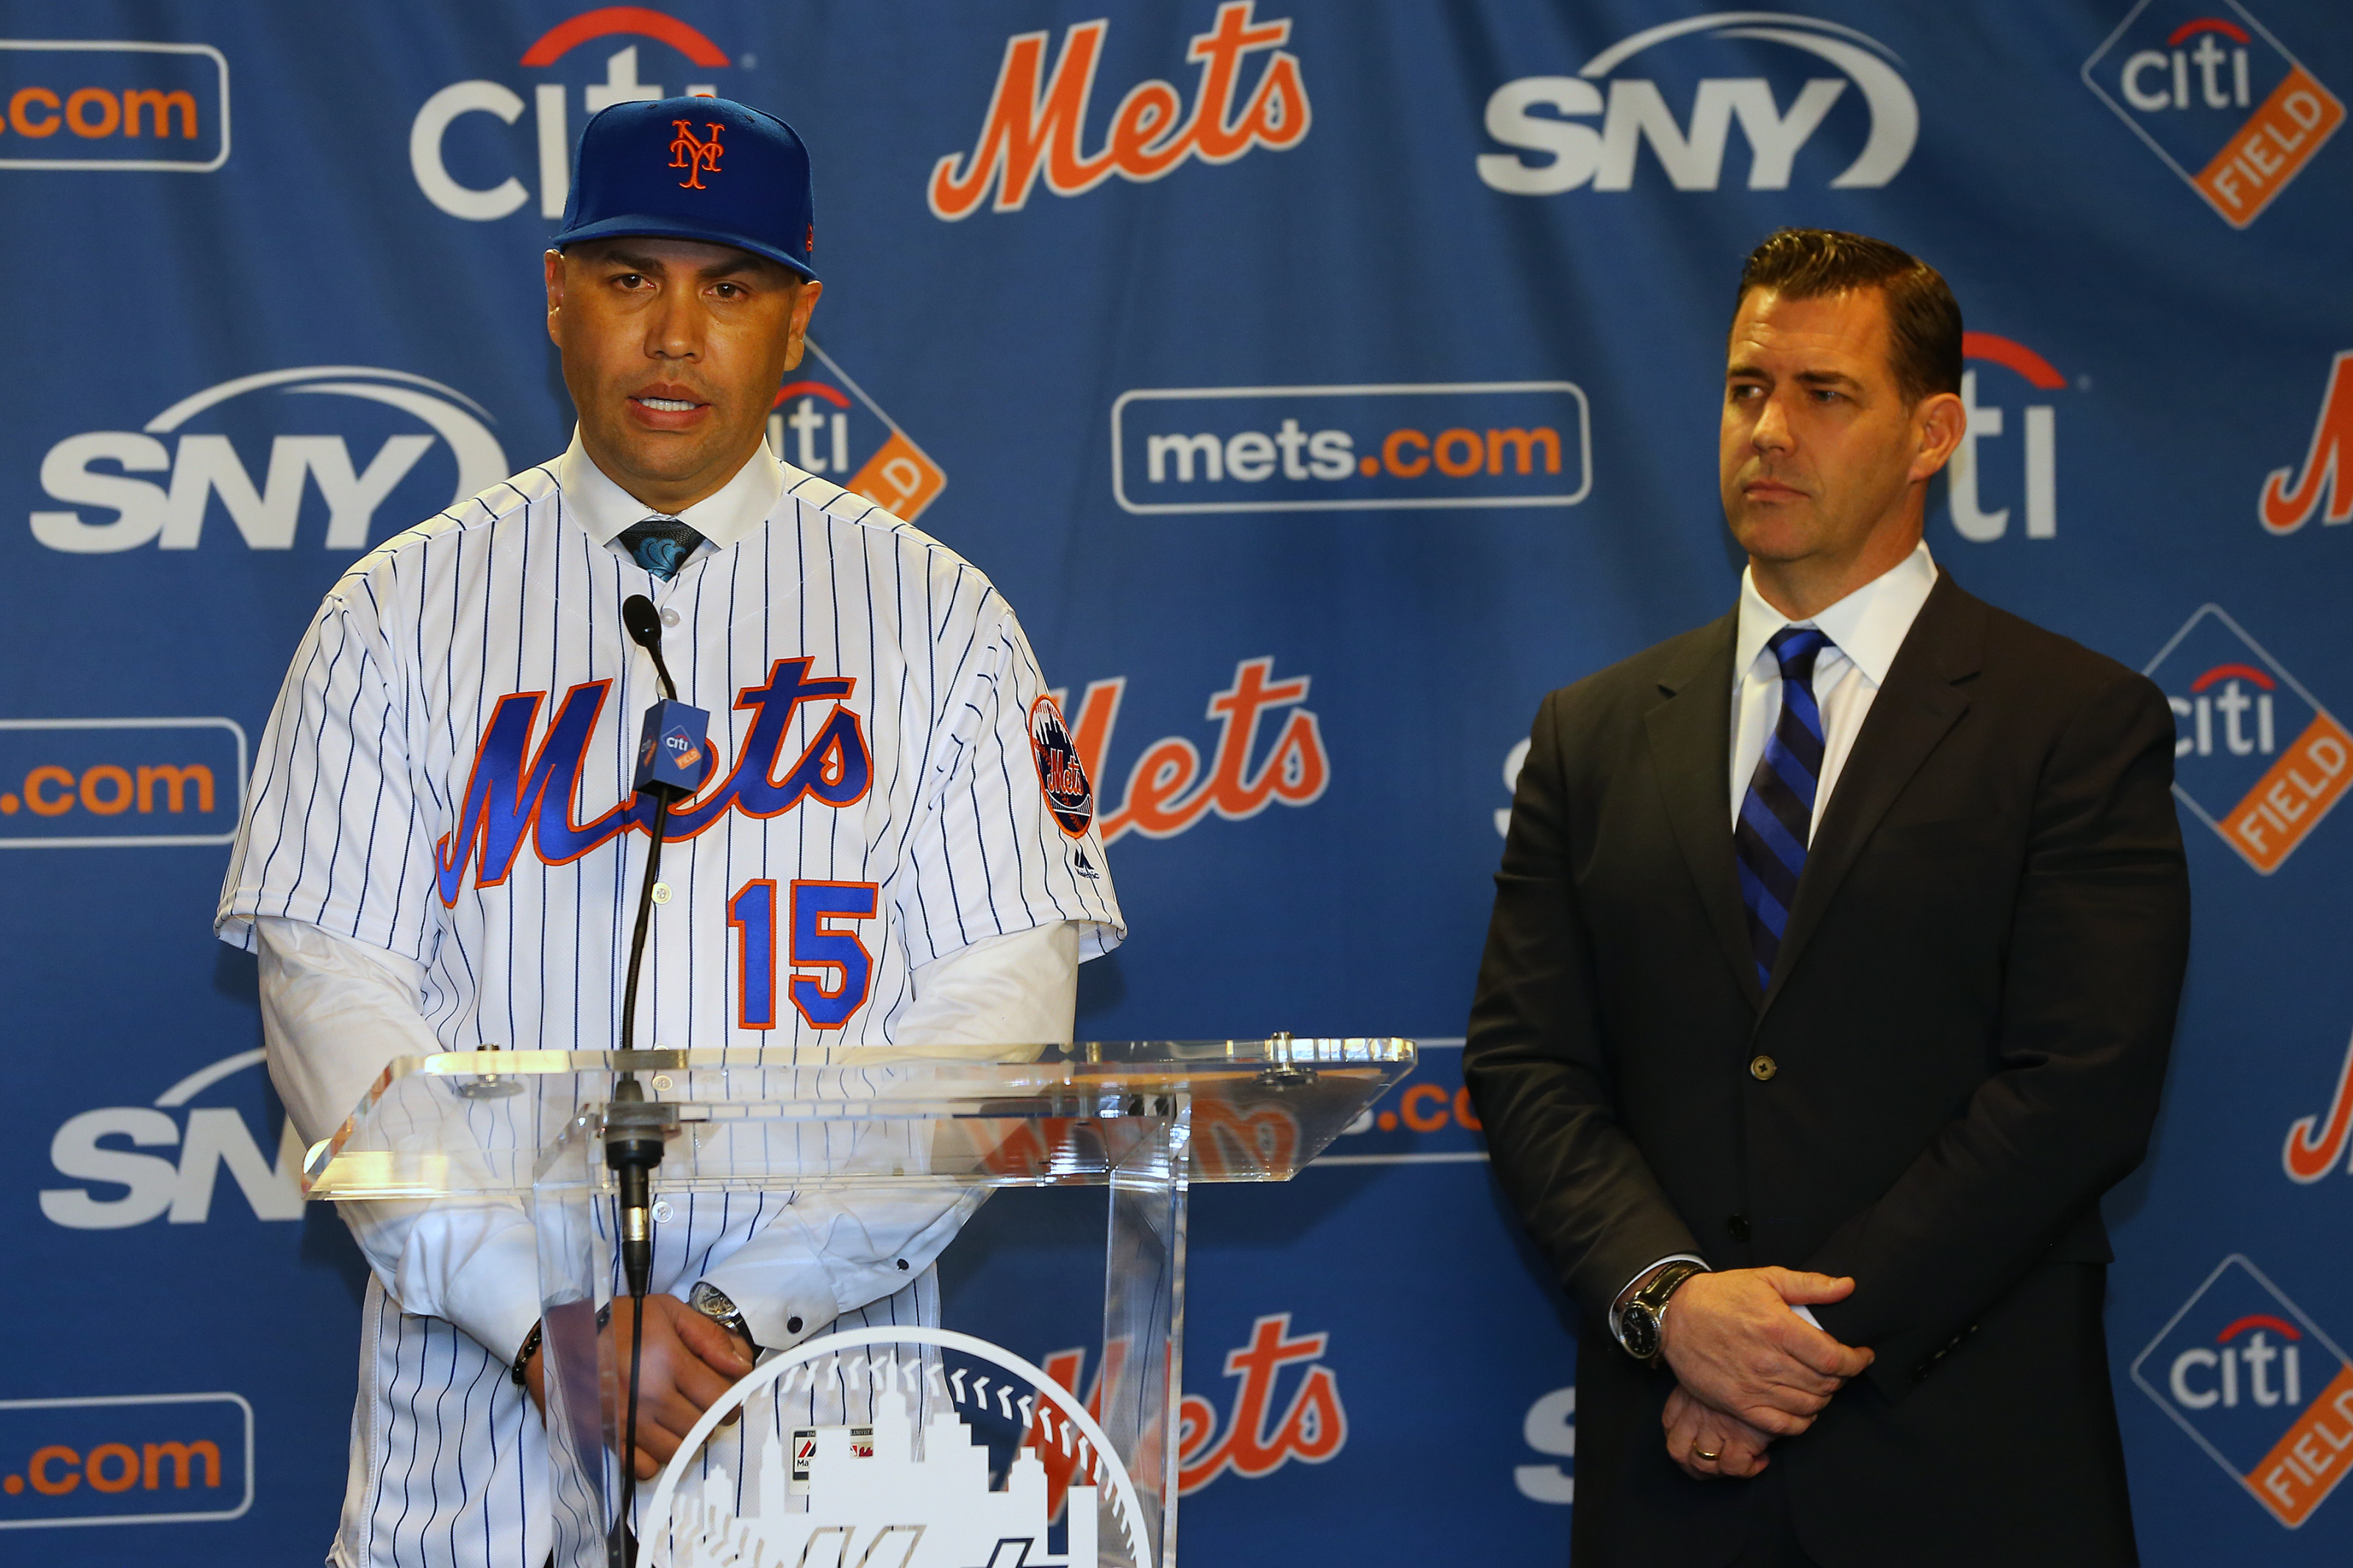 Mets fans cautiously optimistic about Carlos Beltran as manager